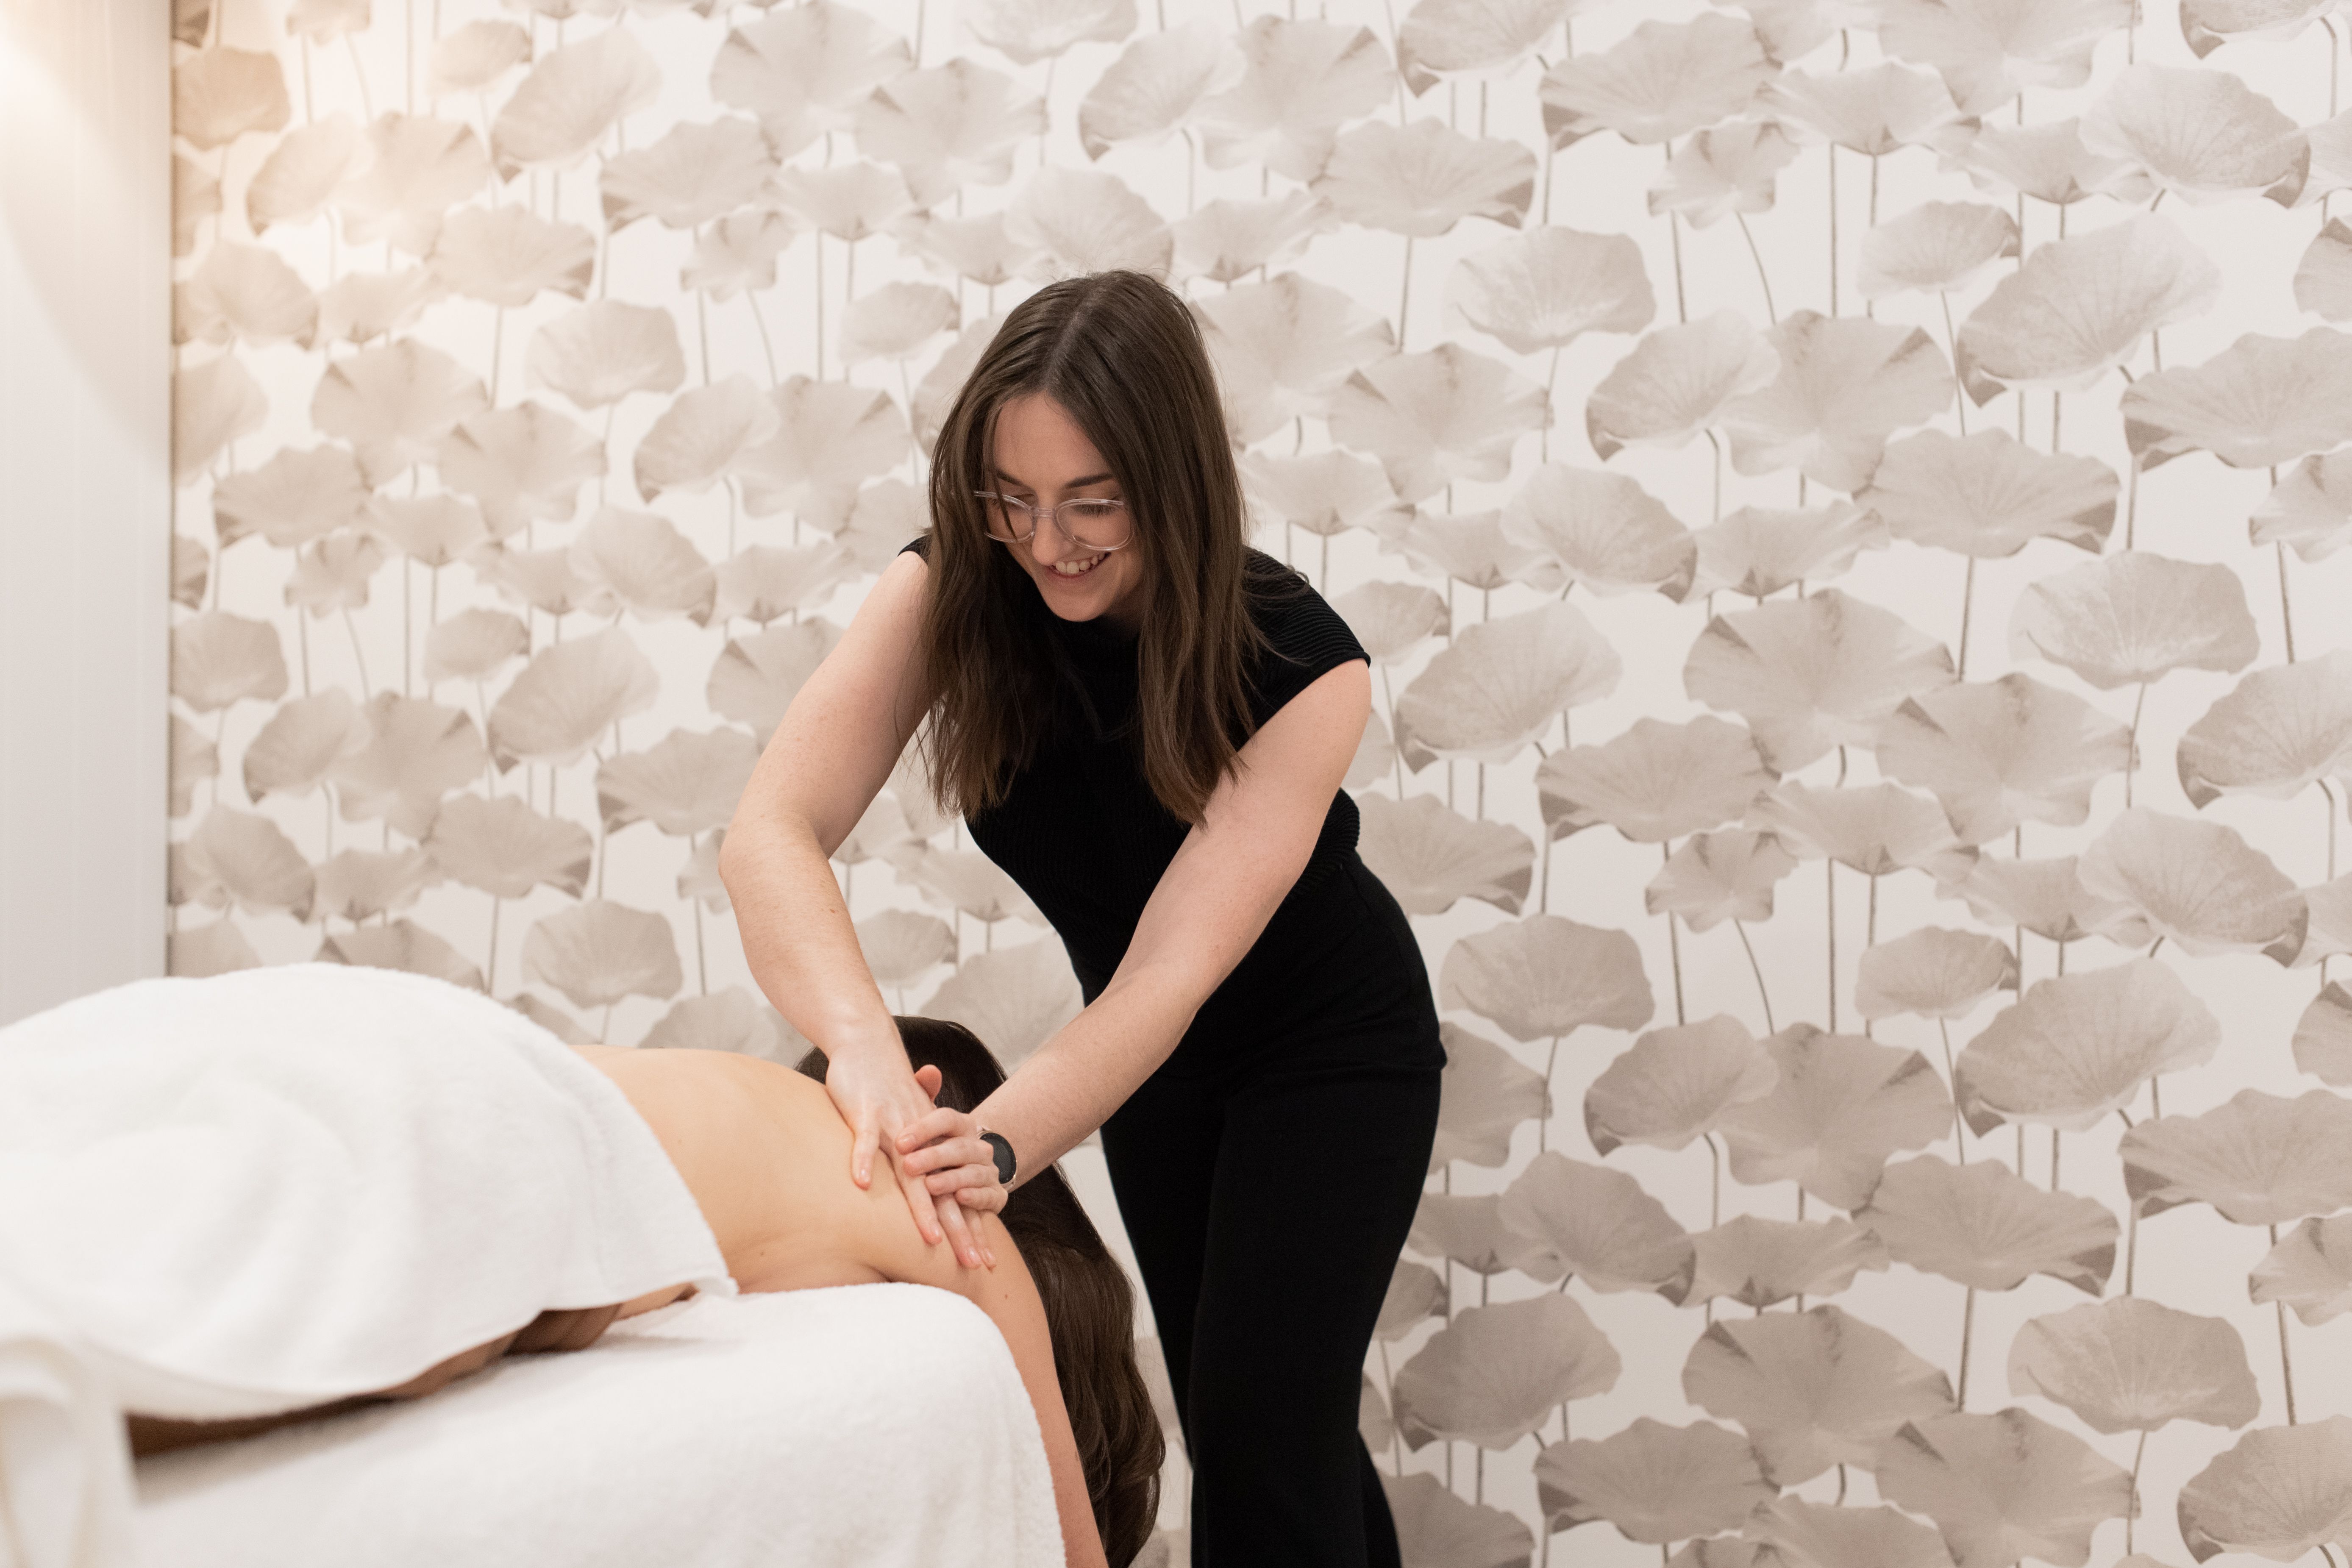 Osteopath Monique performing a treatment in her practice in Melbourne